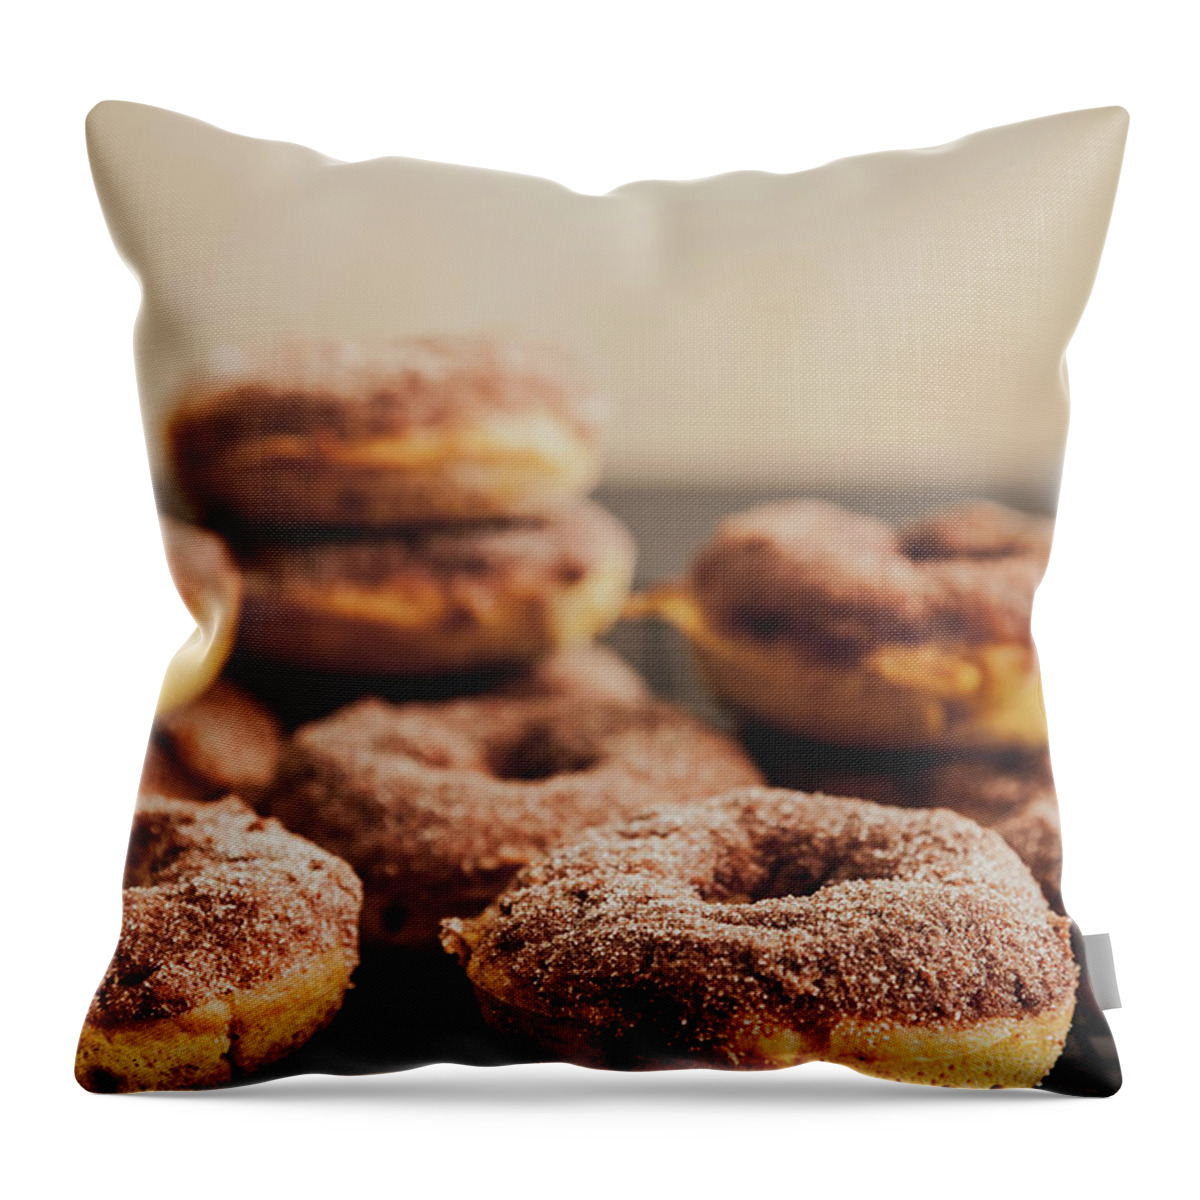 Sugar Throw Pillow featuring the photograph Pumpkin Donuts With Cinnamon Sugar by Beth D. Yeaw